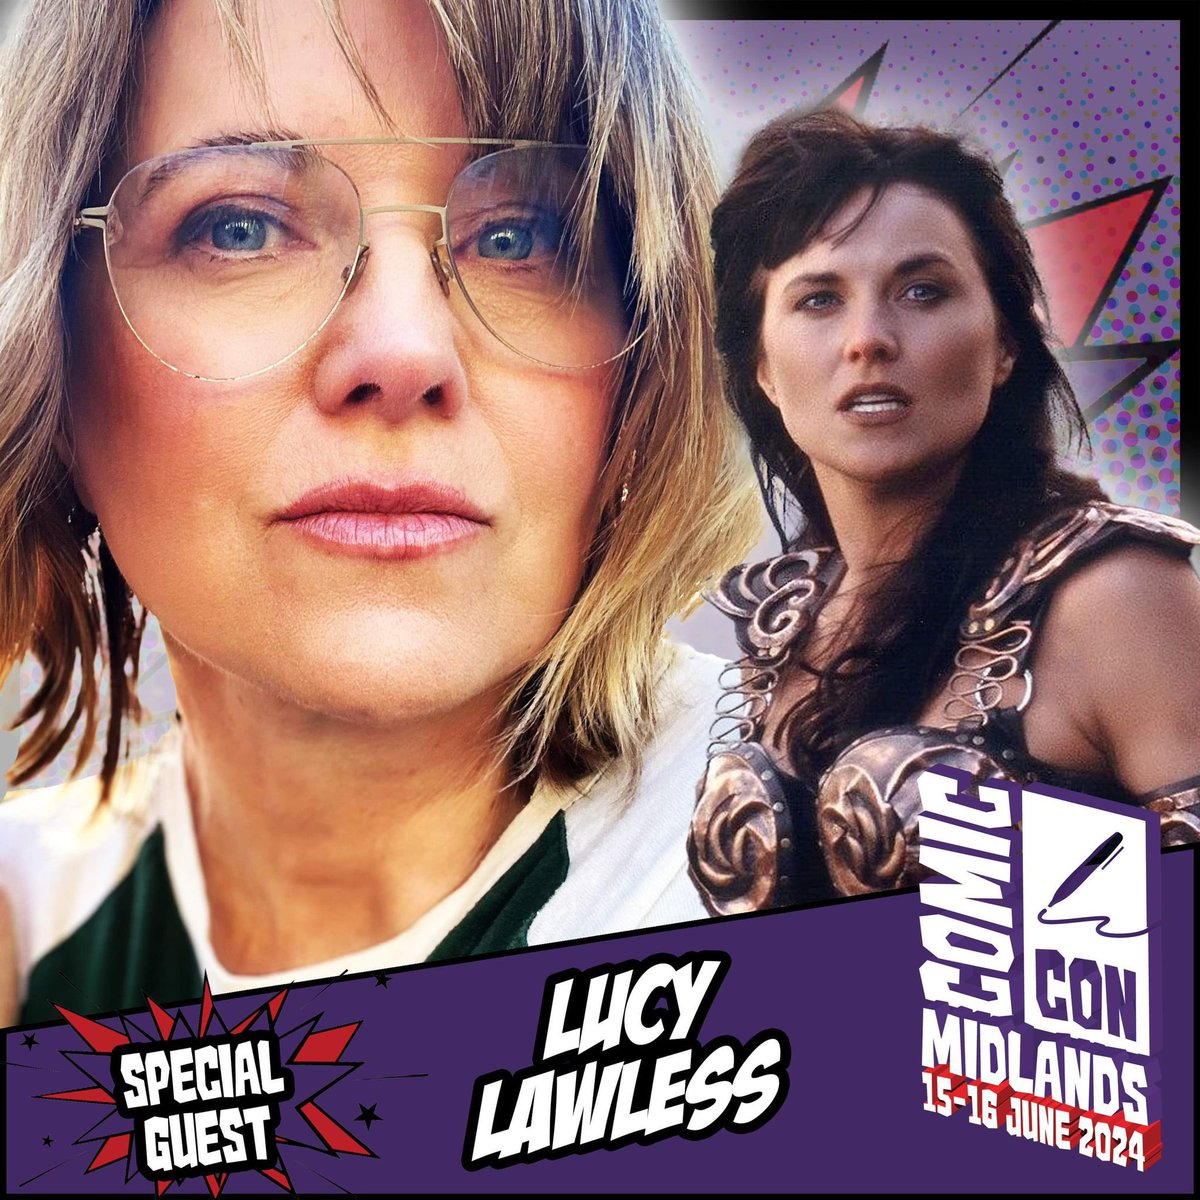 Comic Con Midlands welcomes Lucy Lawless, known for projects such as Xena: Warrior Princess, My Life is Murder, Mosley, Ash vs Evil Dead, and many more. Appearing 15-16 June! Tickets: comicconventionmidlands.co.uk